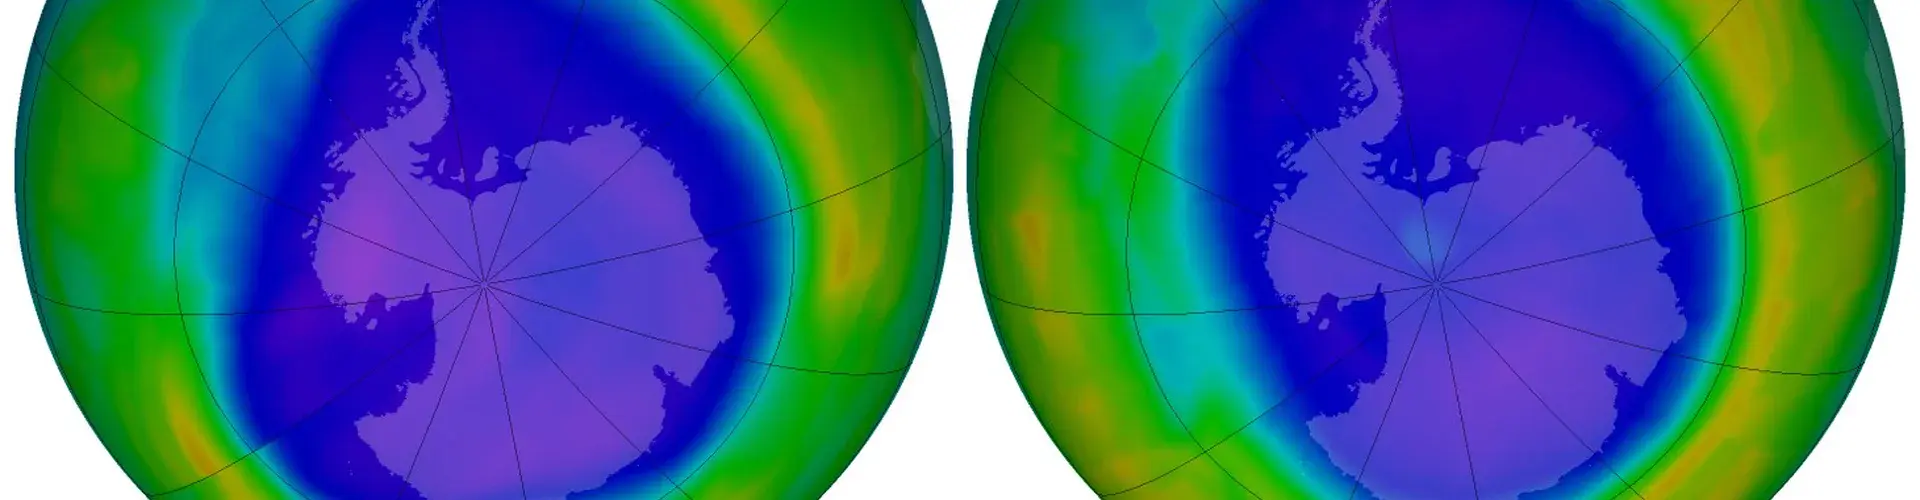 Antarctic ozone 'hole' in September 2006 and 2011 (Credit: NASA's Earth Observatory)